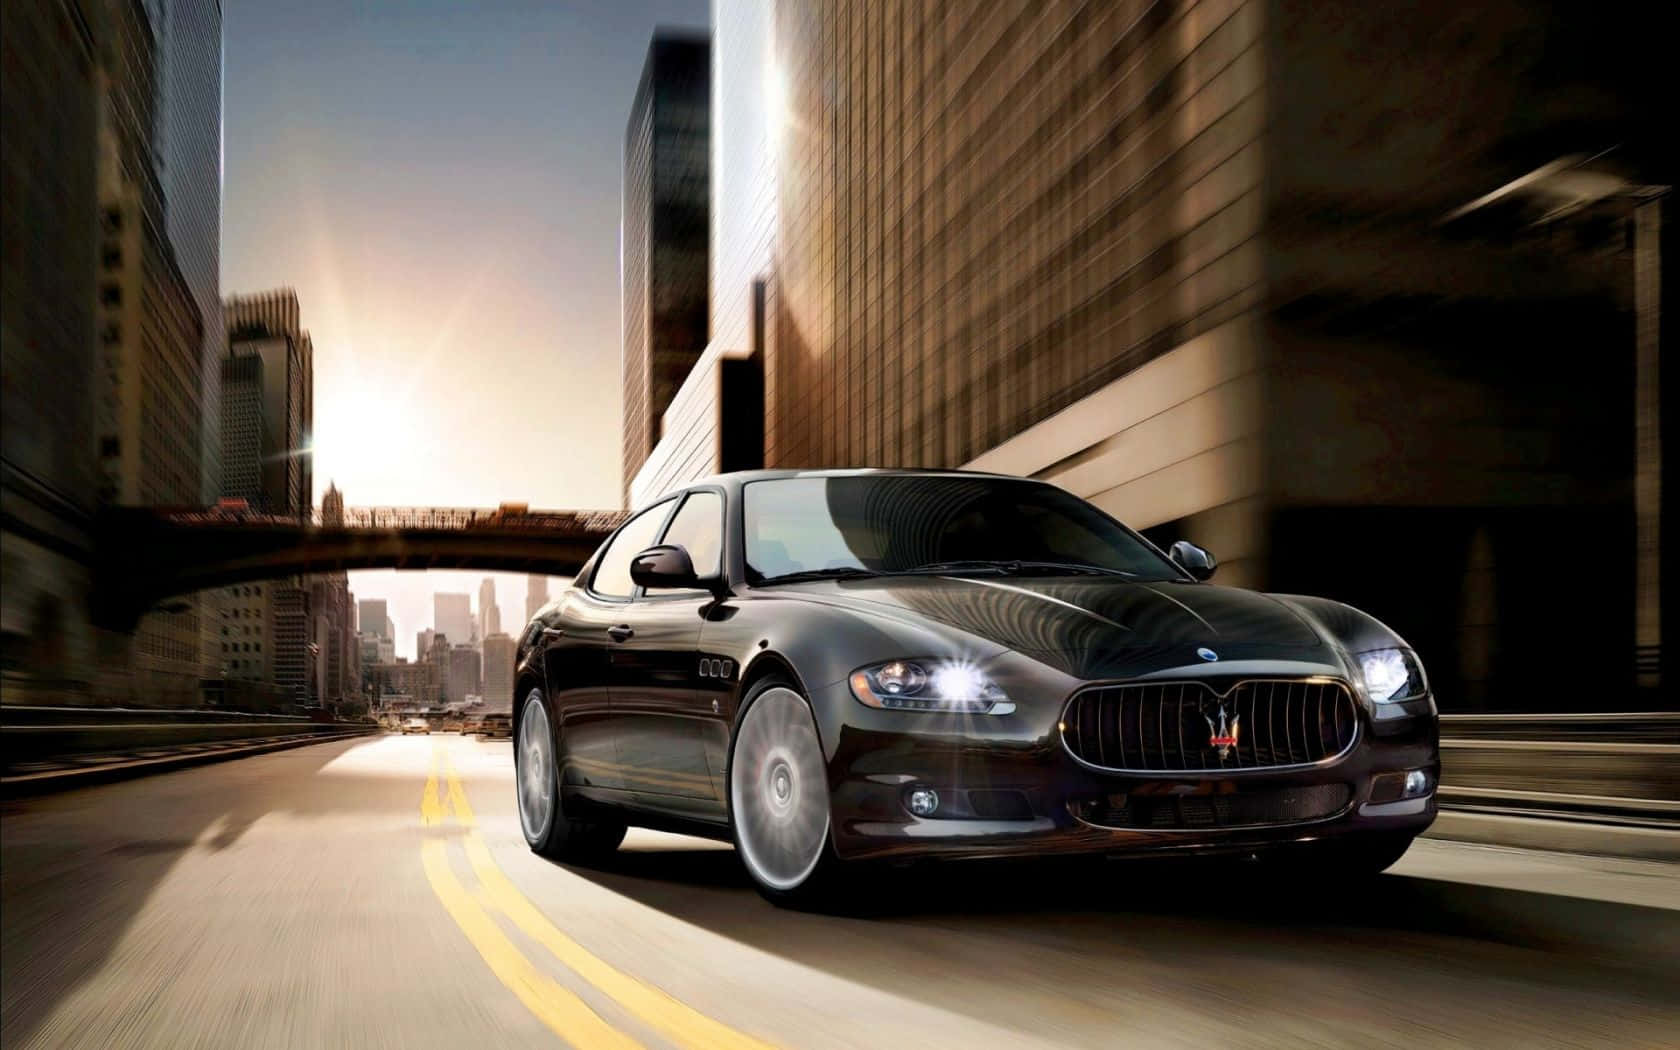 Feast Your Eyes On The Sleek And Luxurious Maserati Quattroporte. Wallpaper